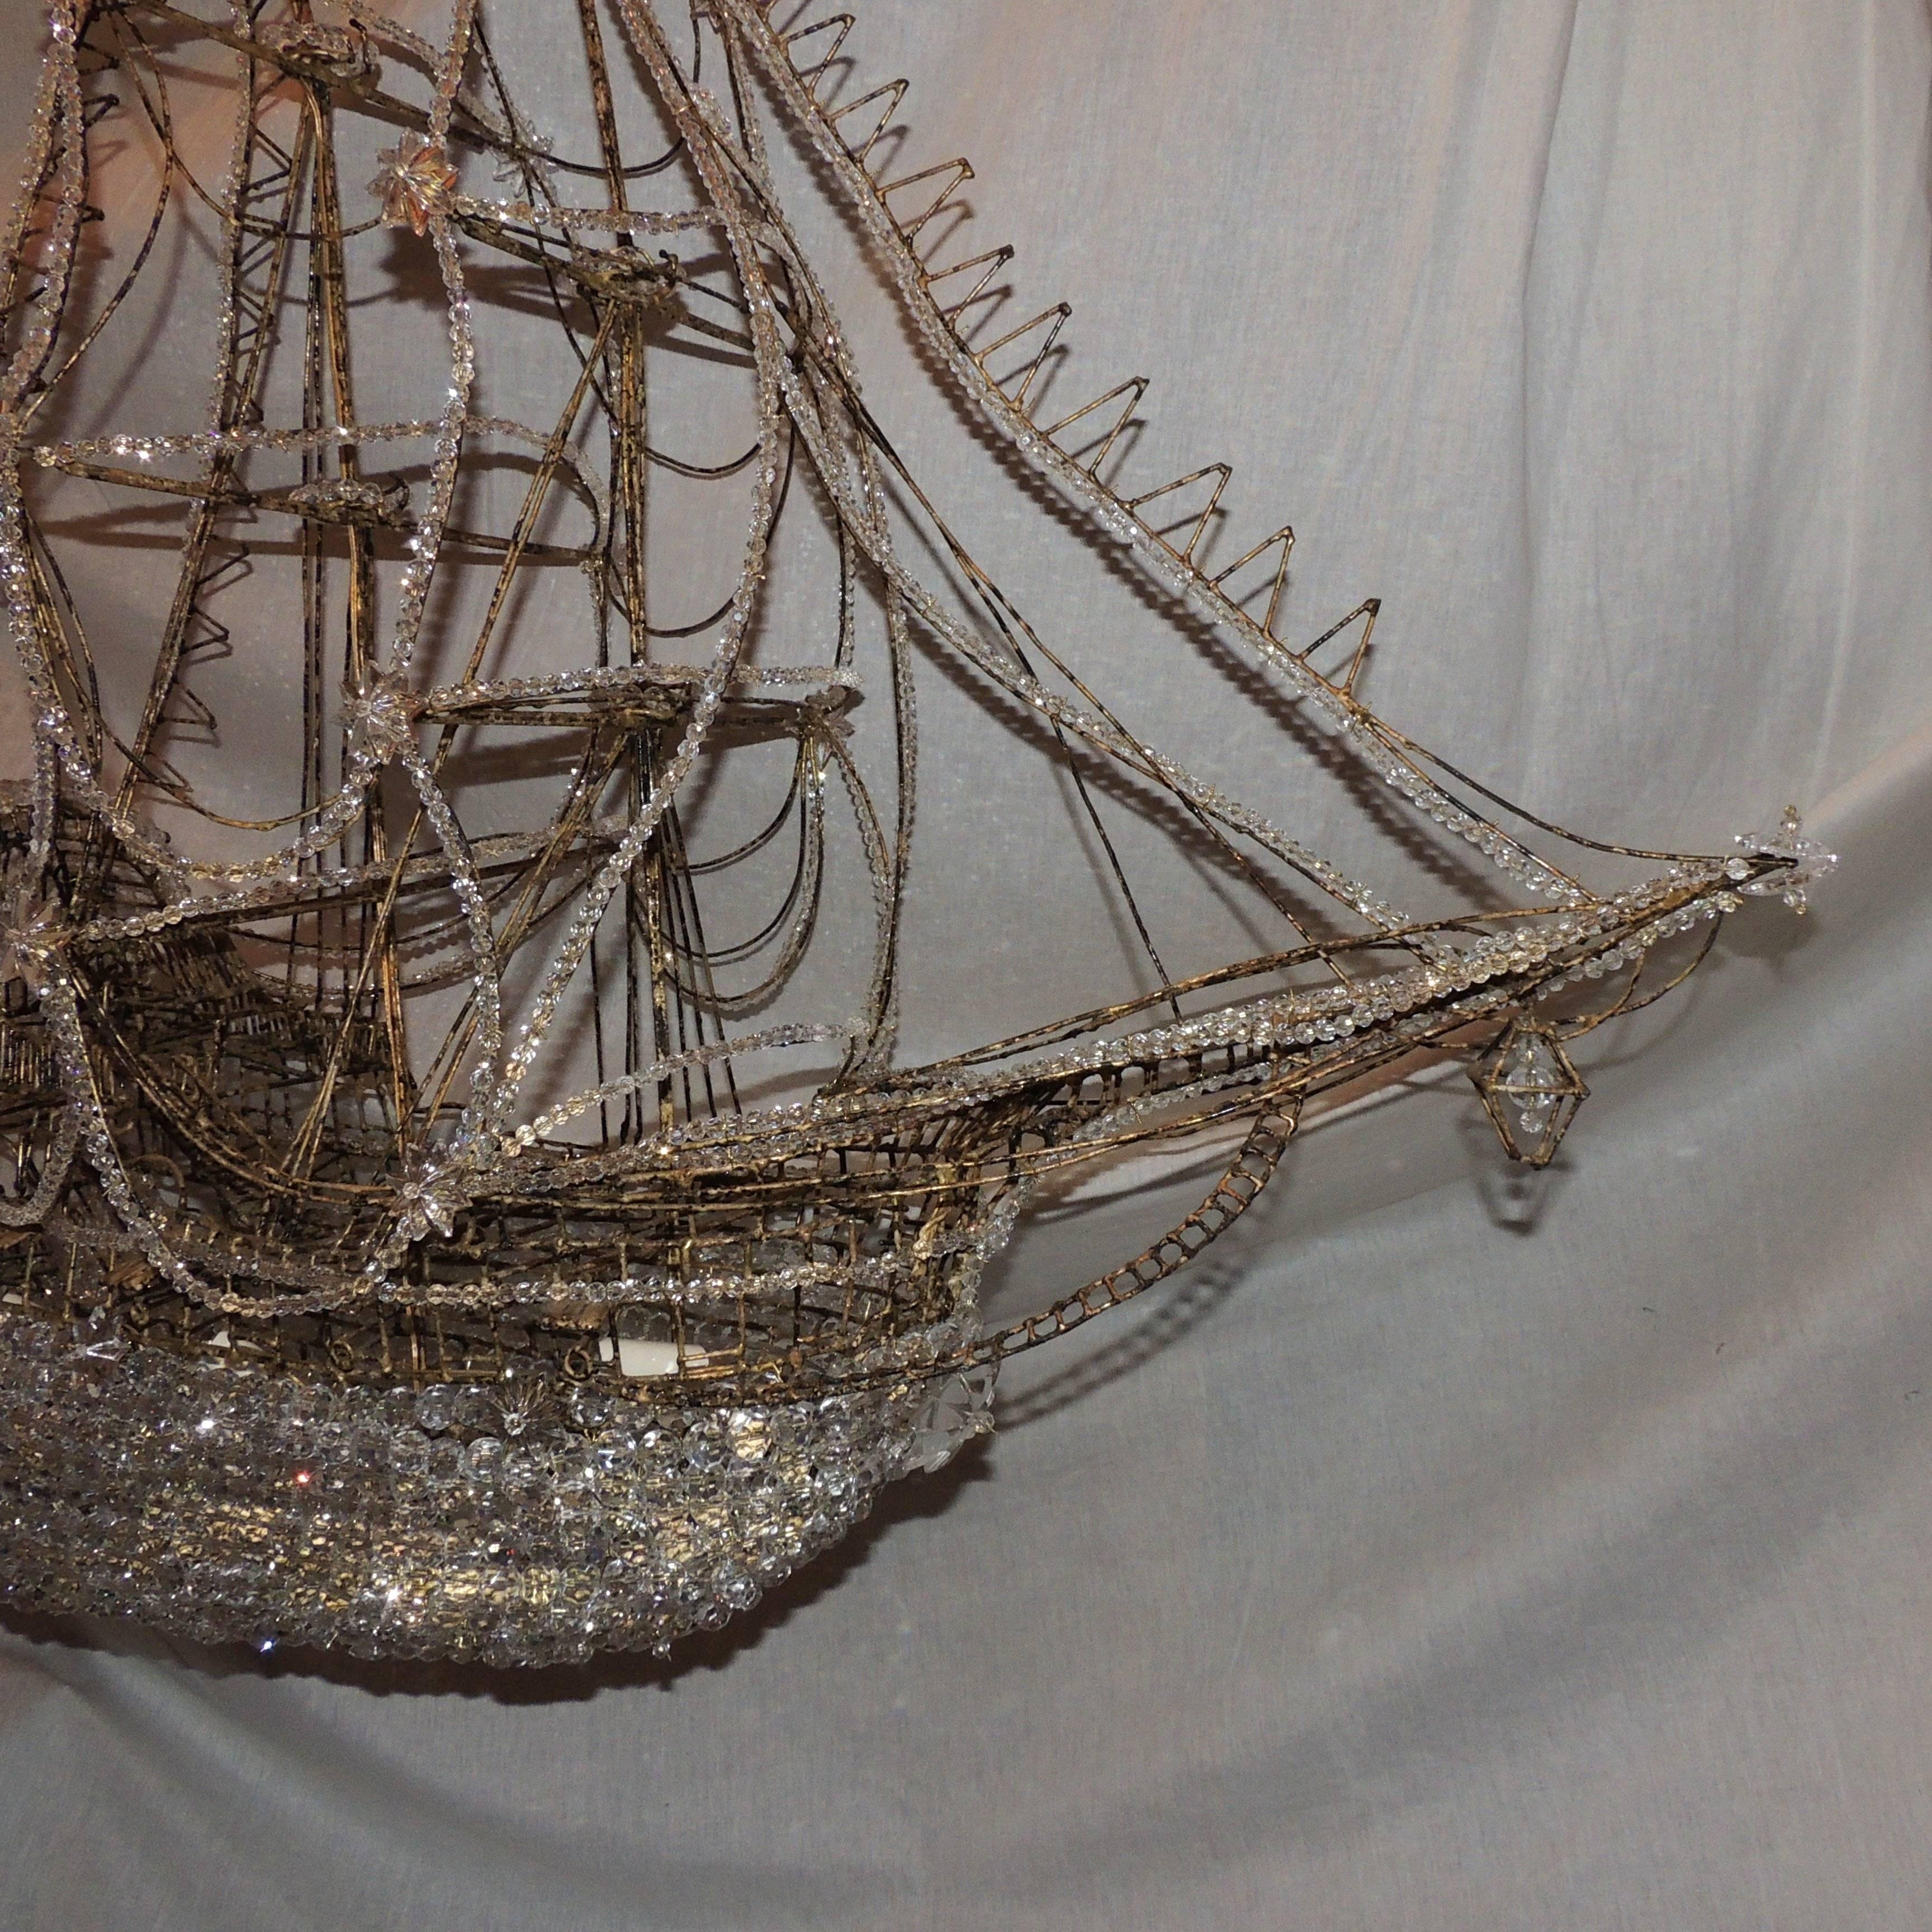 Faceted Beautiful Vintage Large Italian Crystal Beaded Gilt Boat Chandelier Ship Fixture